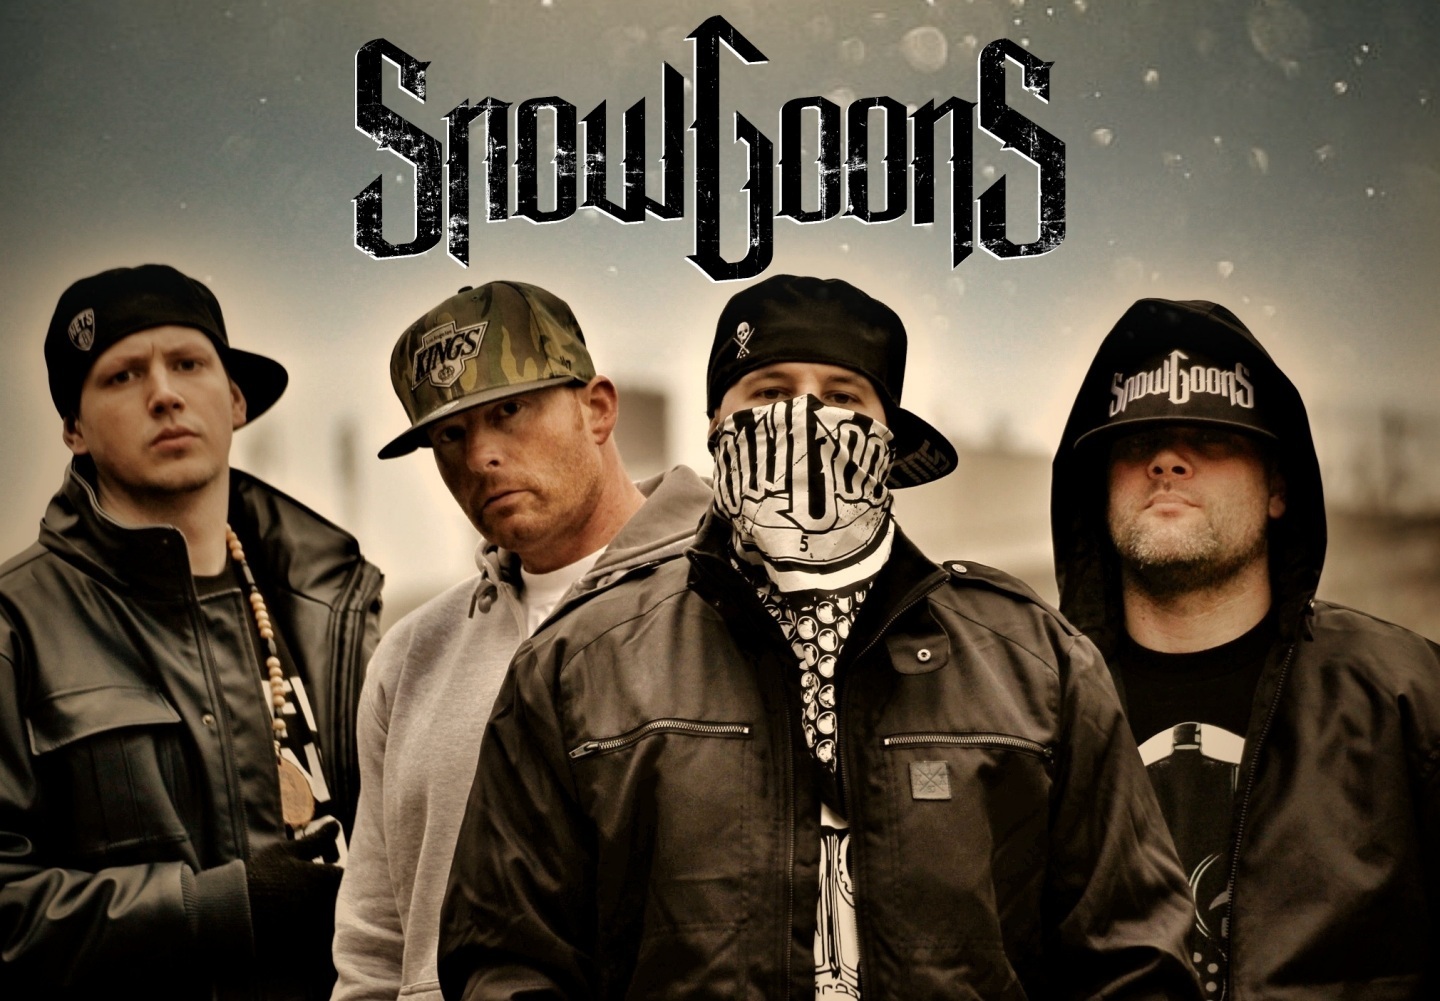 Snowgoons Big Wallpaper Photo Shared By Noach Fans Share Image